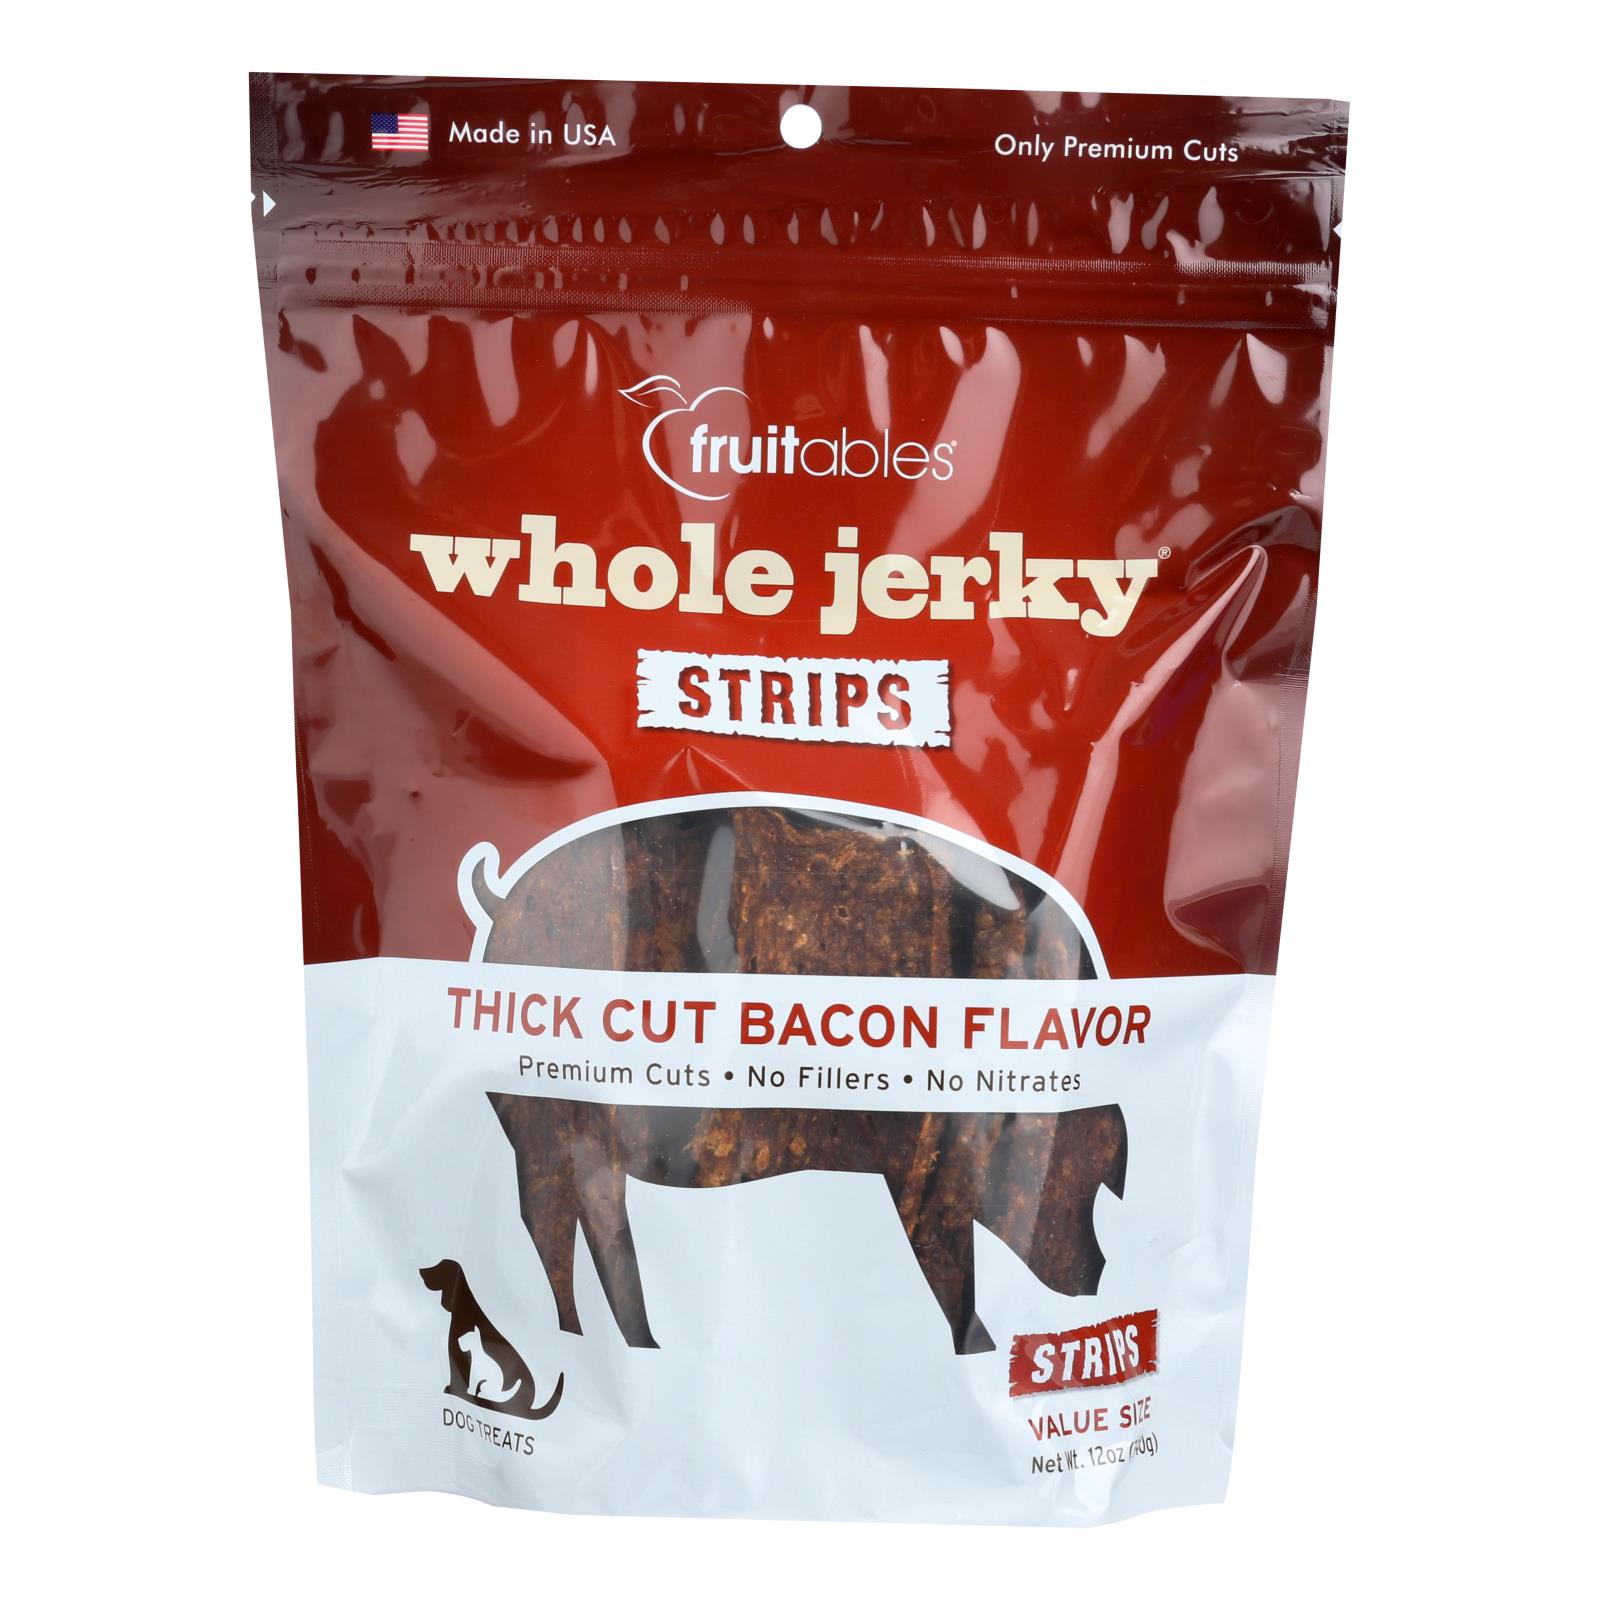 Fruitables Thick Cut Bacon Flavor Whole Jerky Strips Dog Treats - Case of 6 - 12 OZ